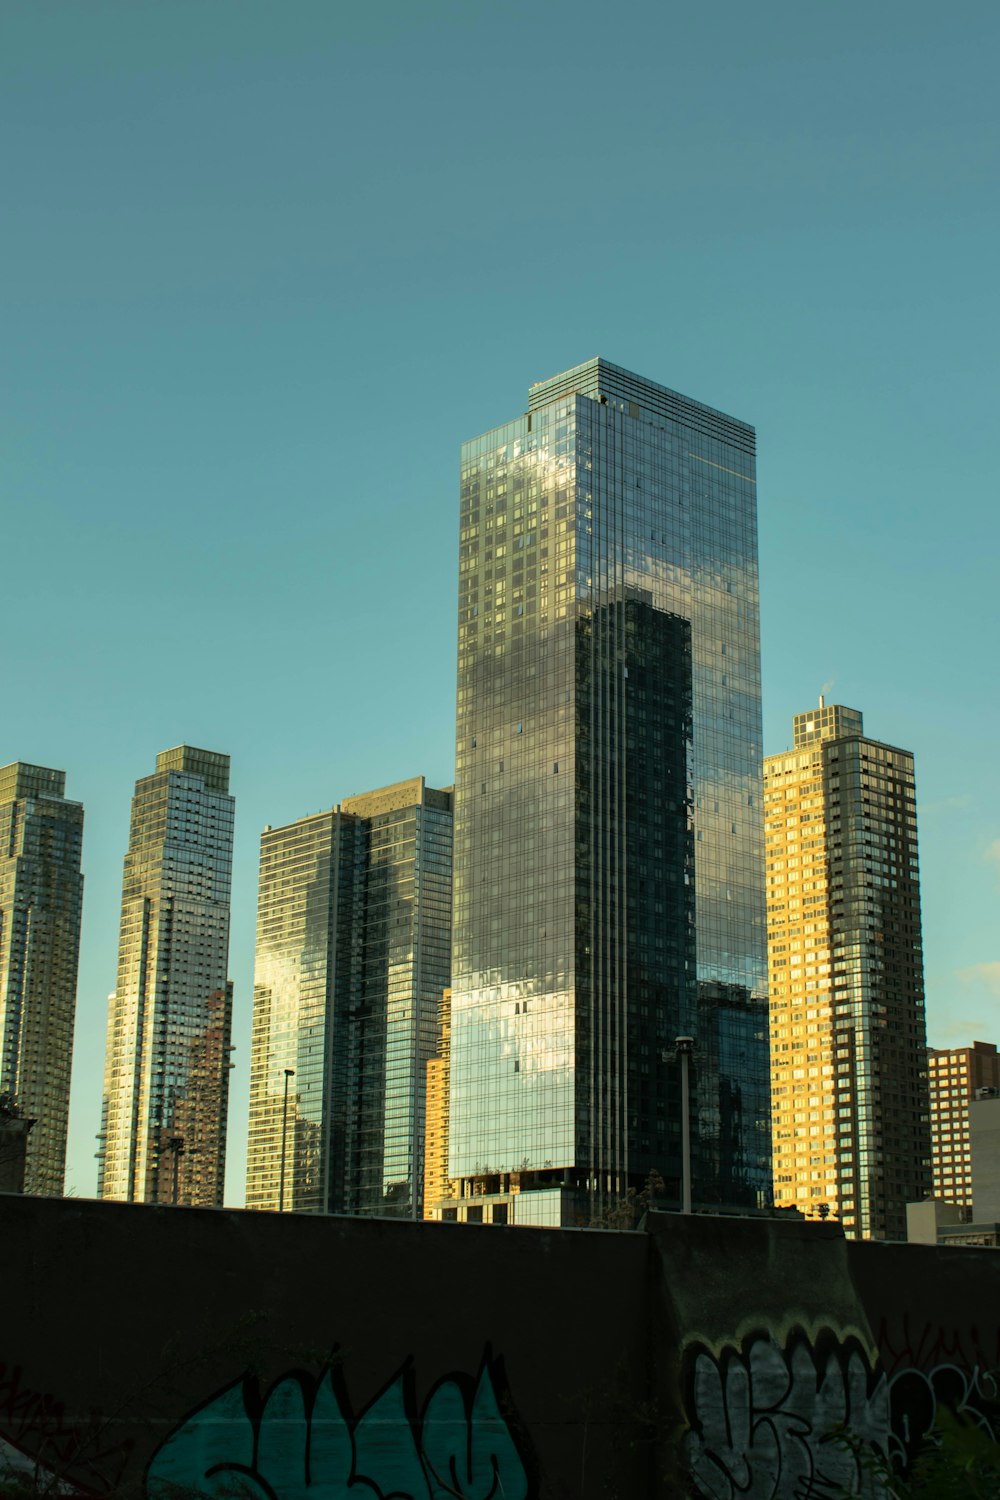 a view of a city skyline with tall buildings